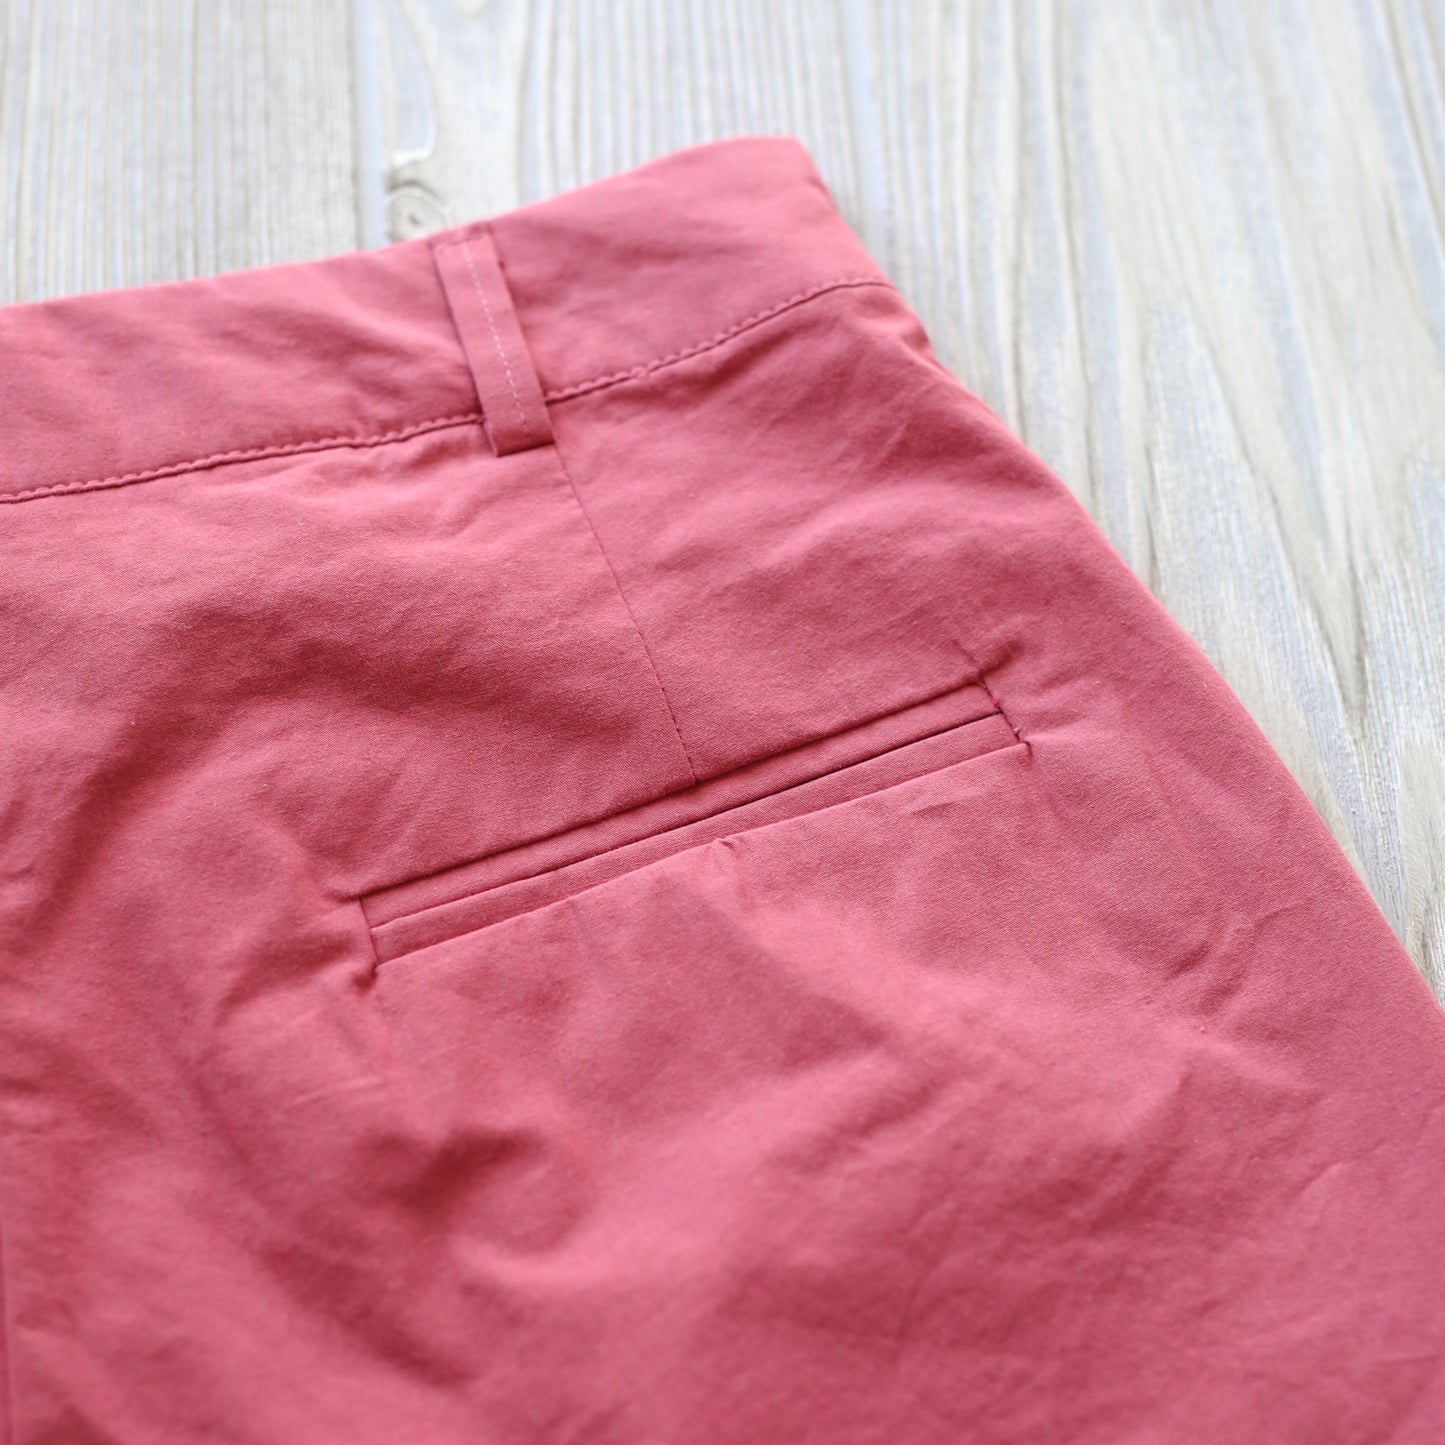 On Point Pocket Pleated Shorts in Rose